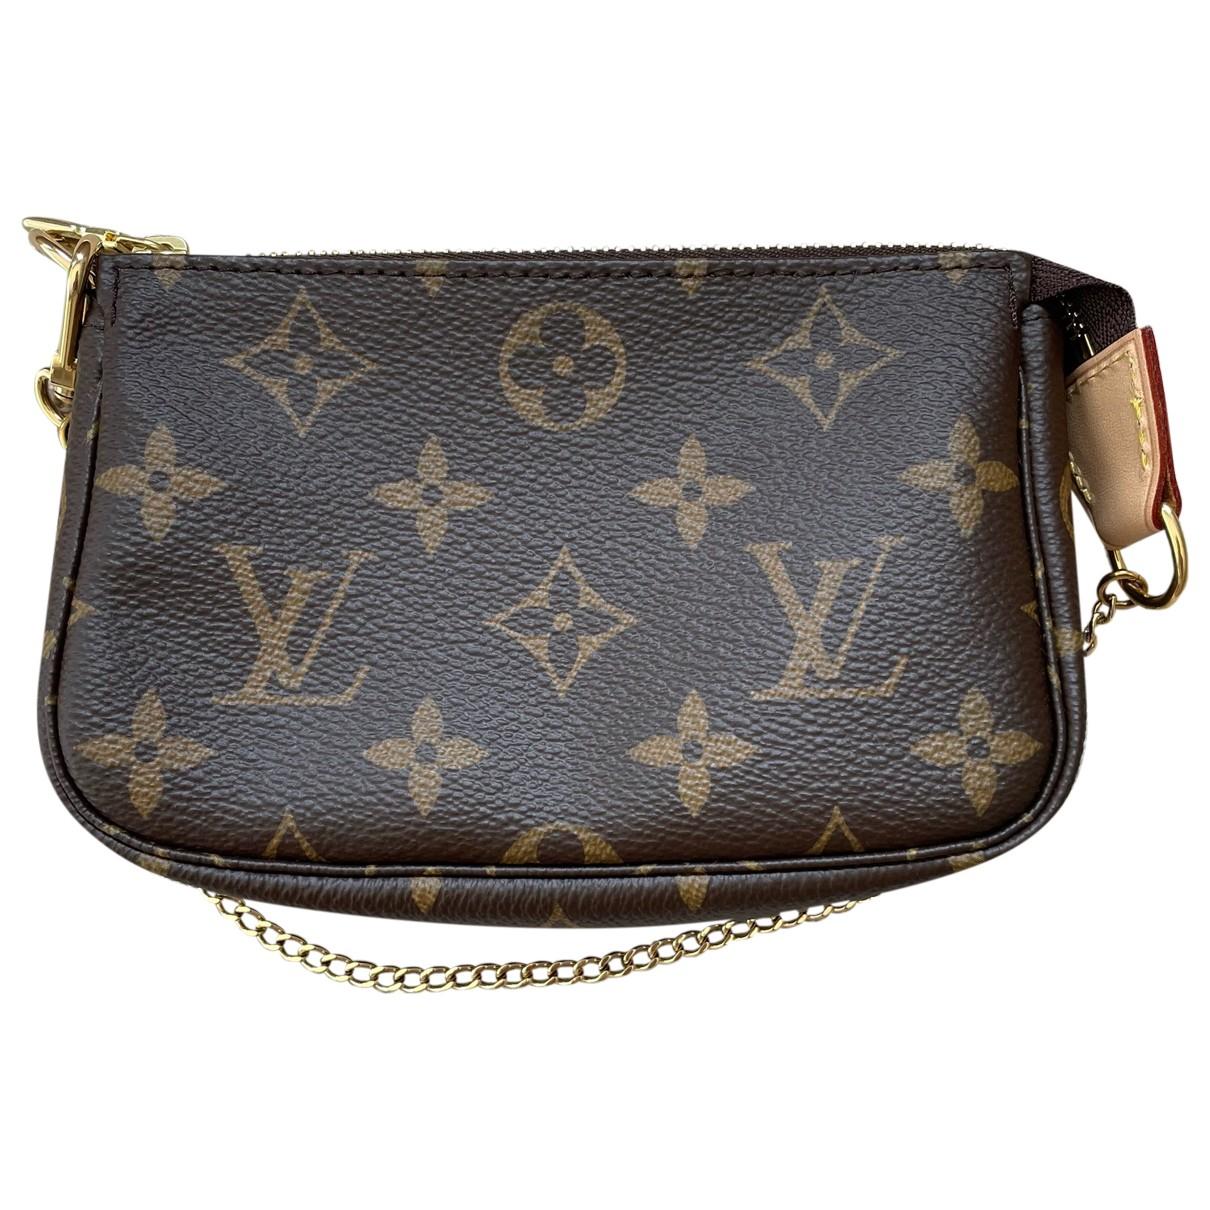 Louis Vuitton - Authenticated Neverfull Clutch Bag - Leather Brown Plain for Women, Never Worn